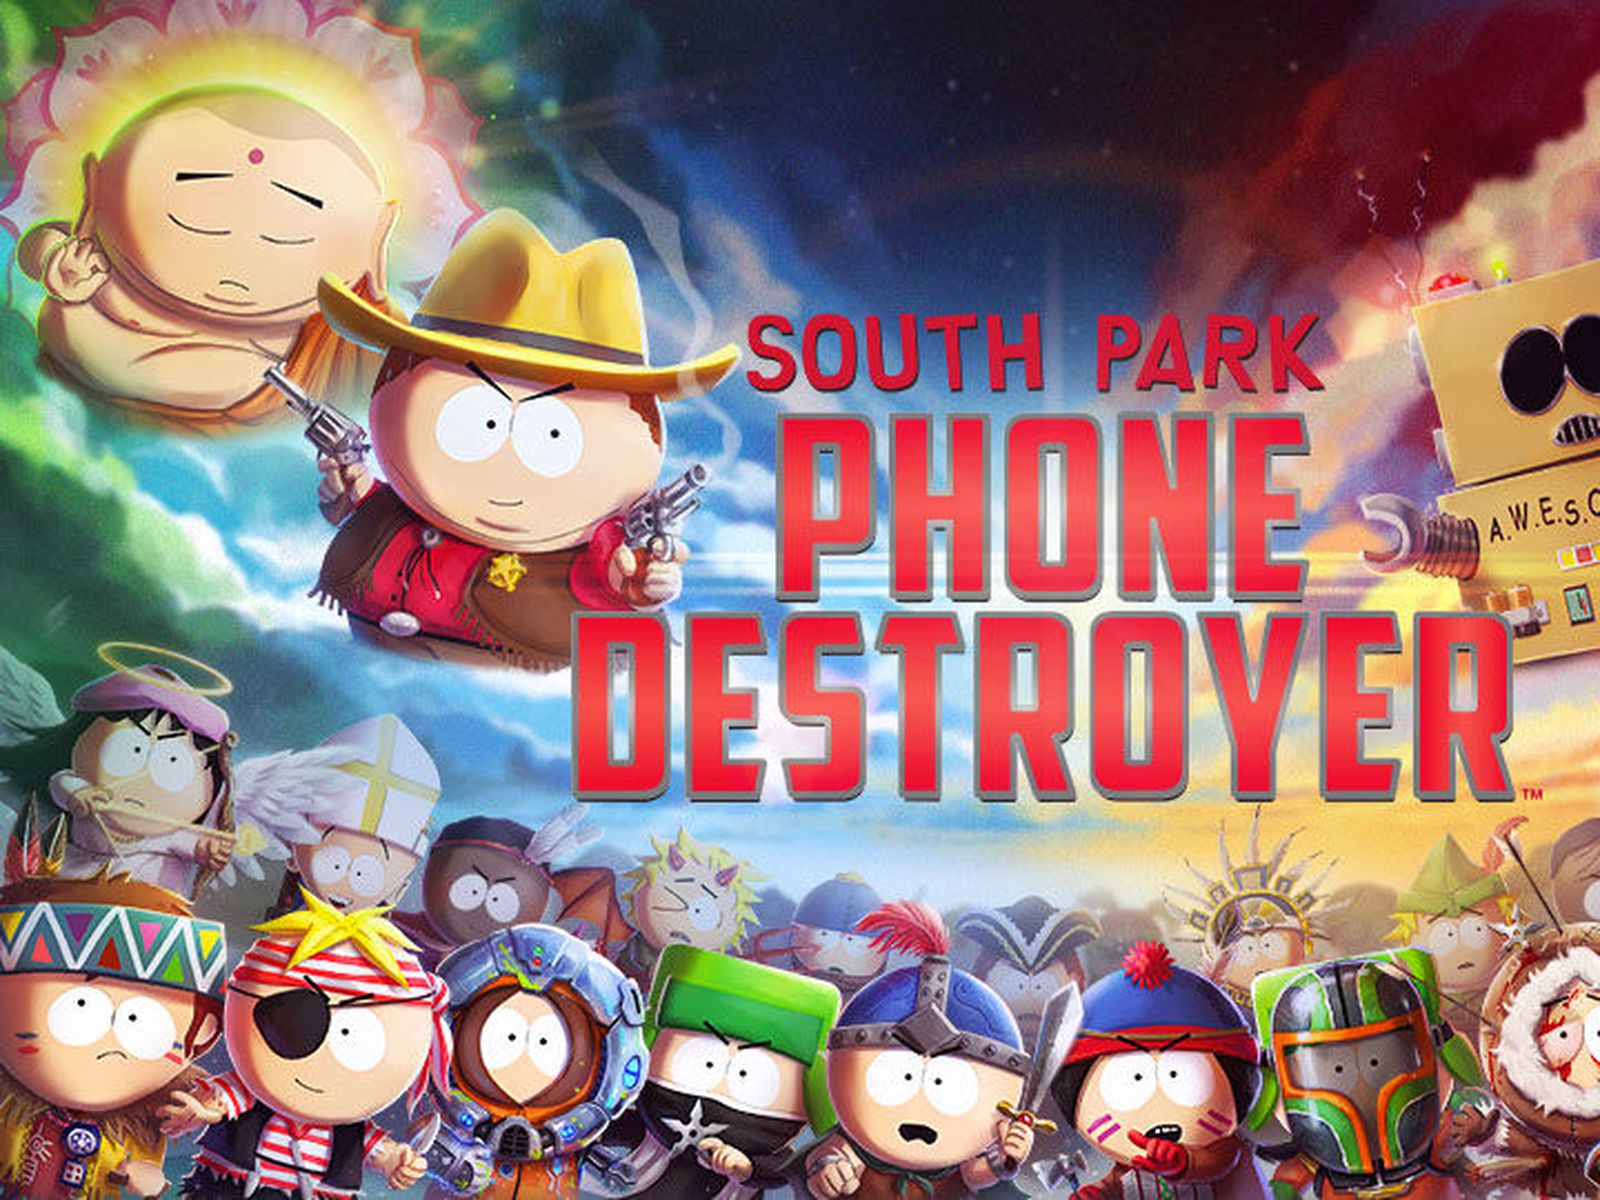 Ubisoft Announces New Free To Play RPG 'South Park: Phone Destroyer' Coming To IOS In 2017